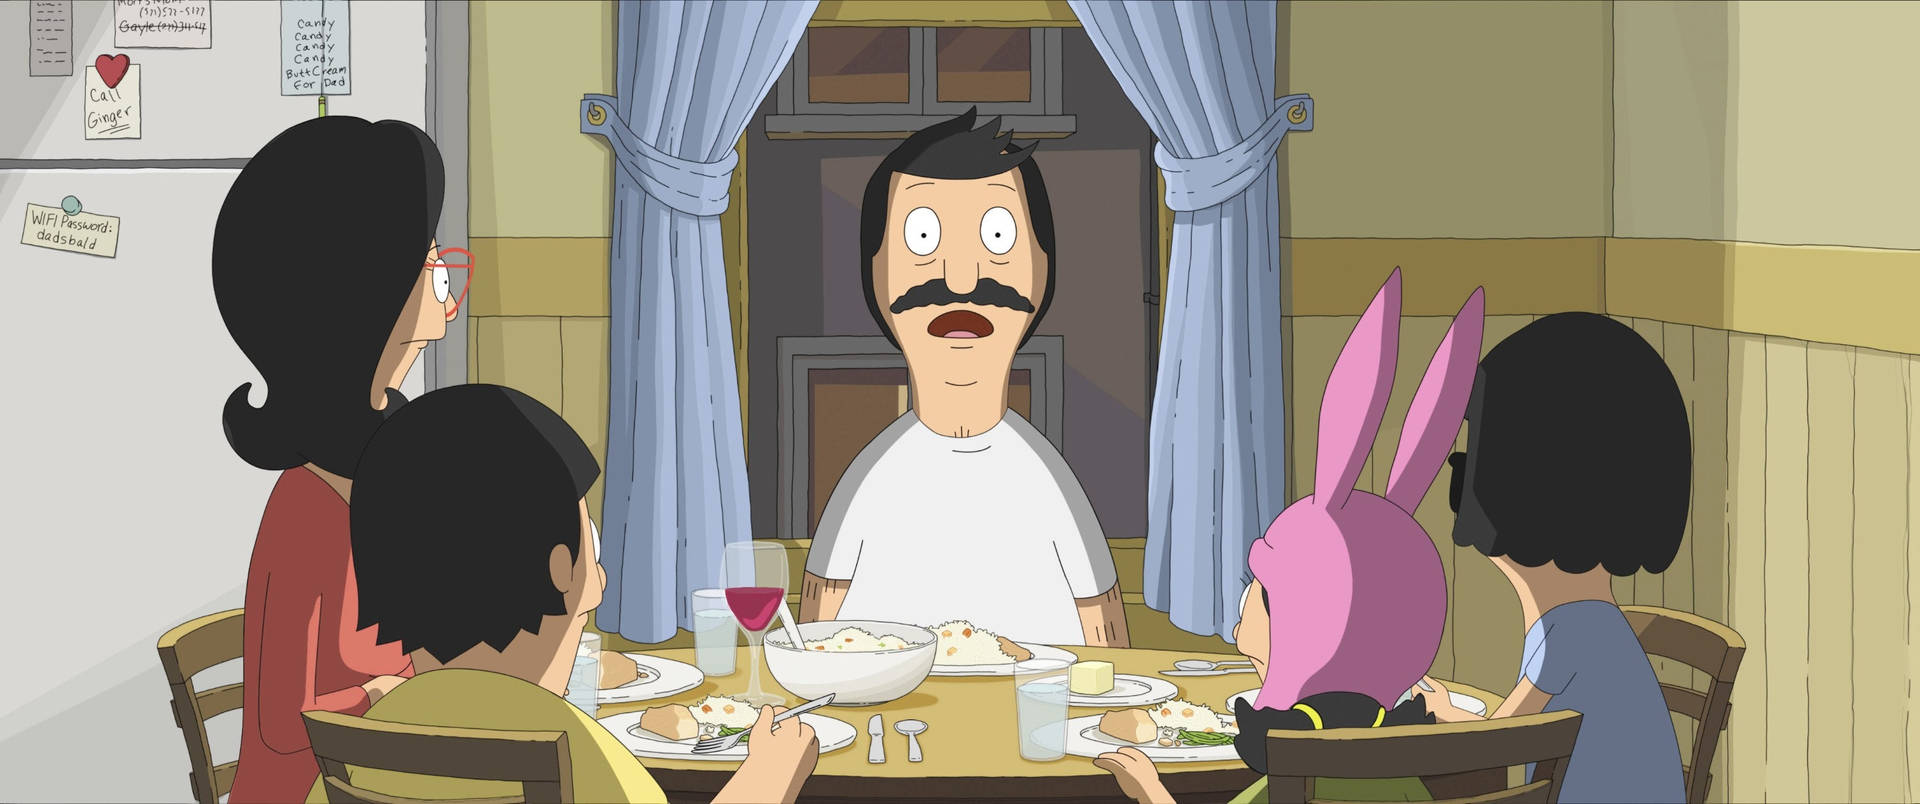 Shocked Bob From Bobs Burgers